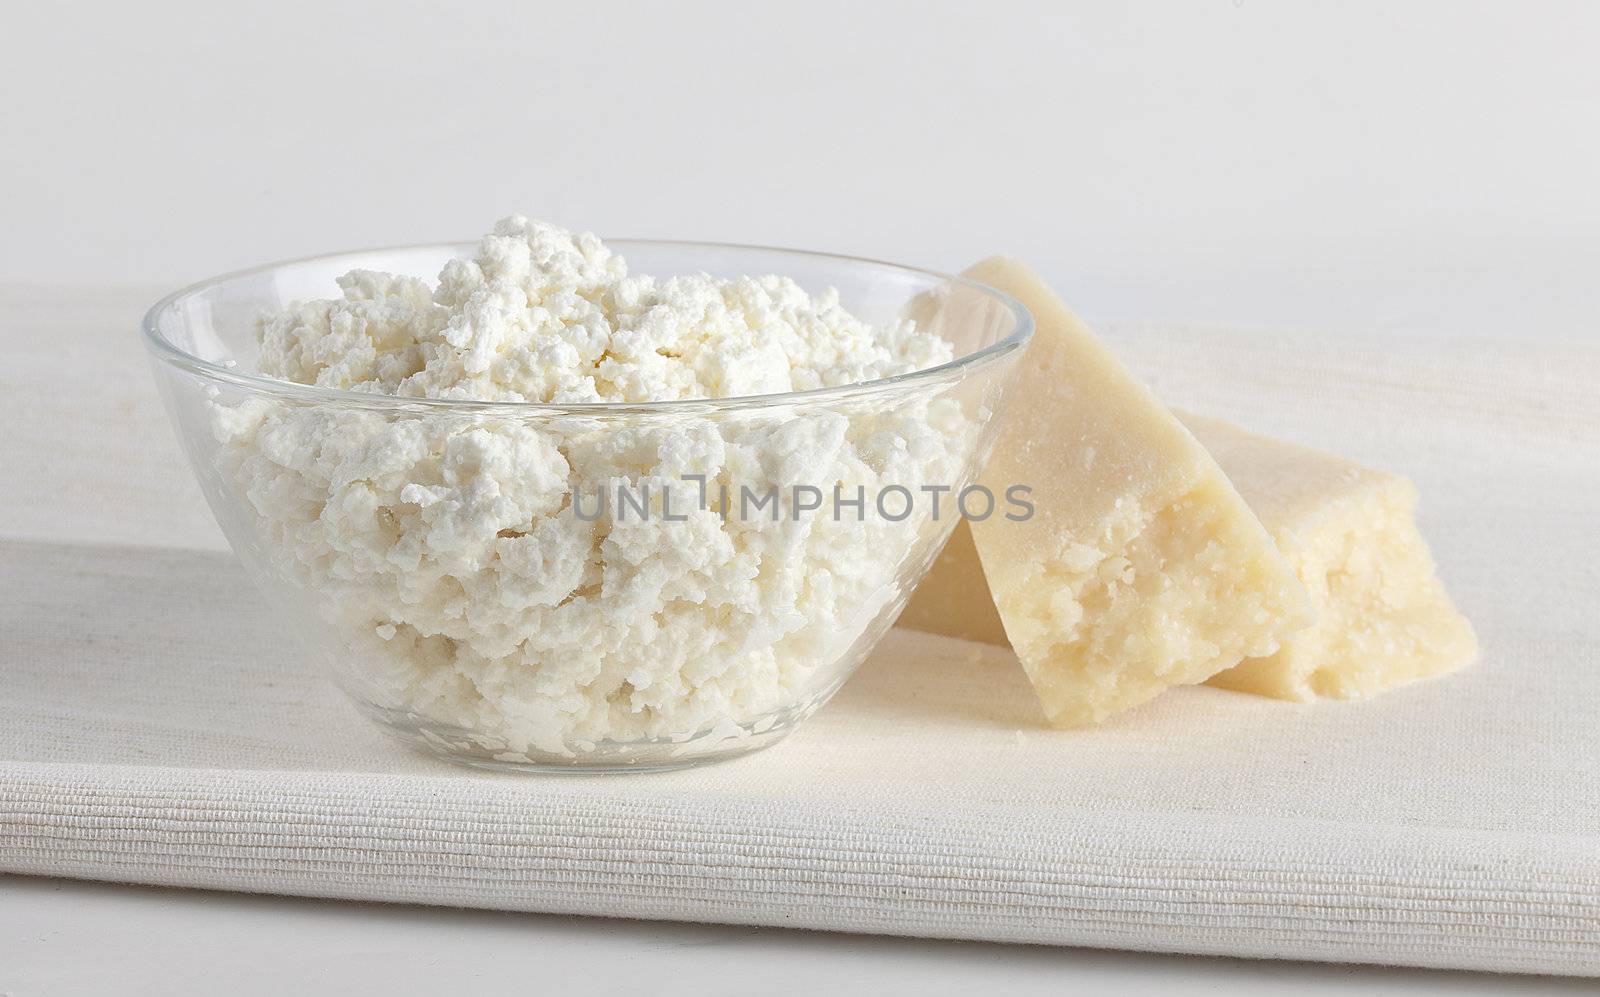 Cottage cheese in the glass bowl with hard cheese on the napkin